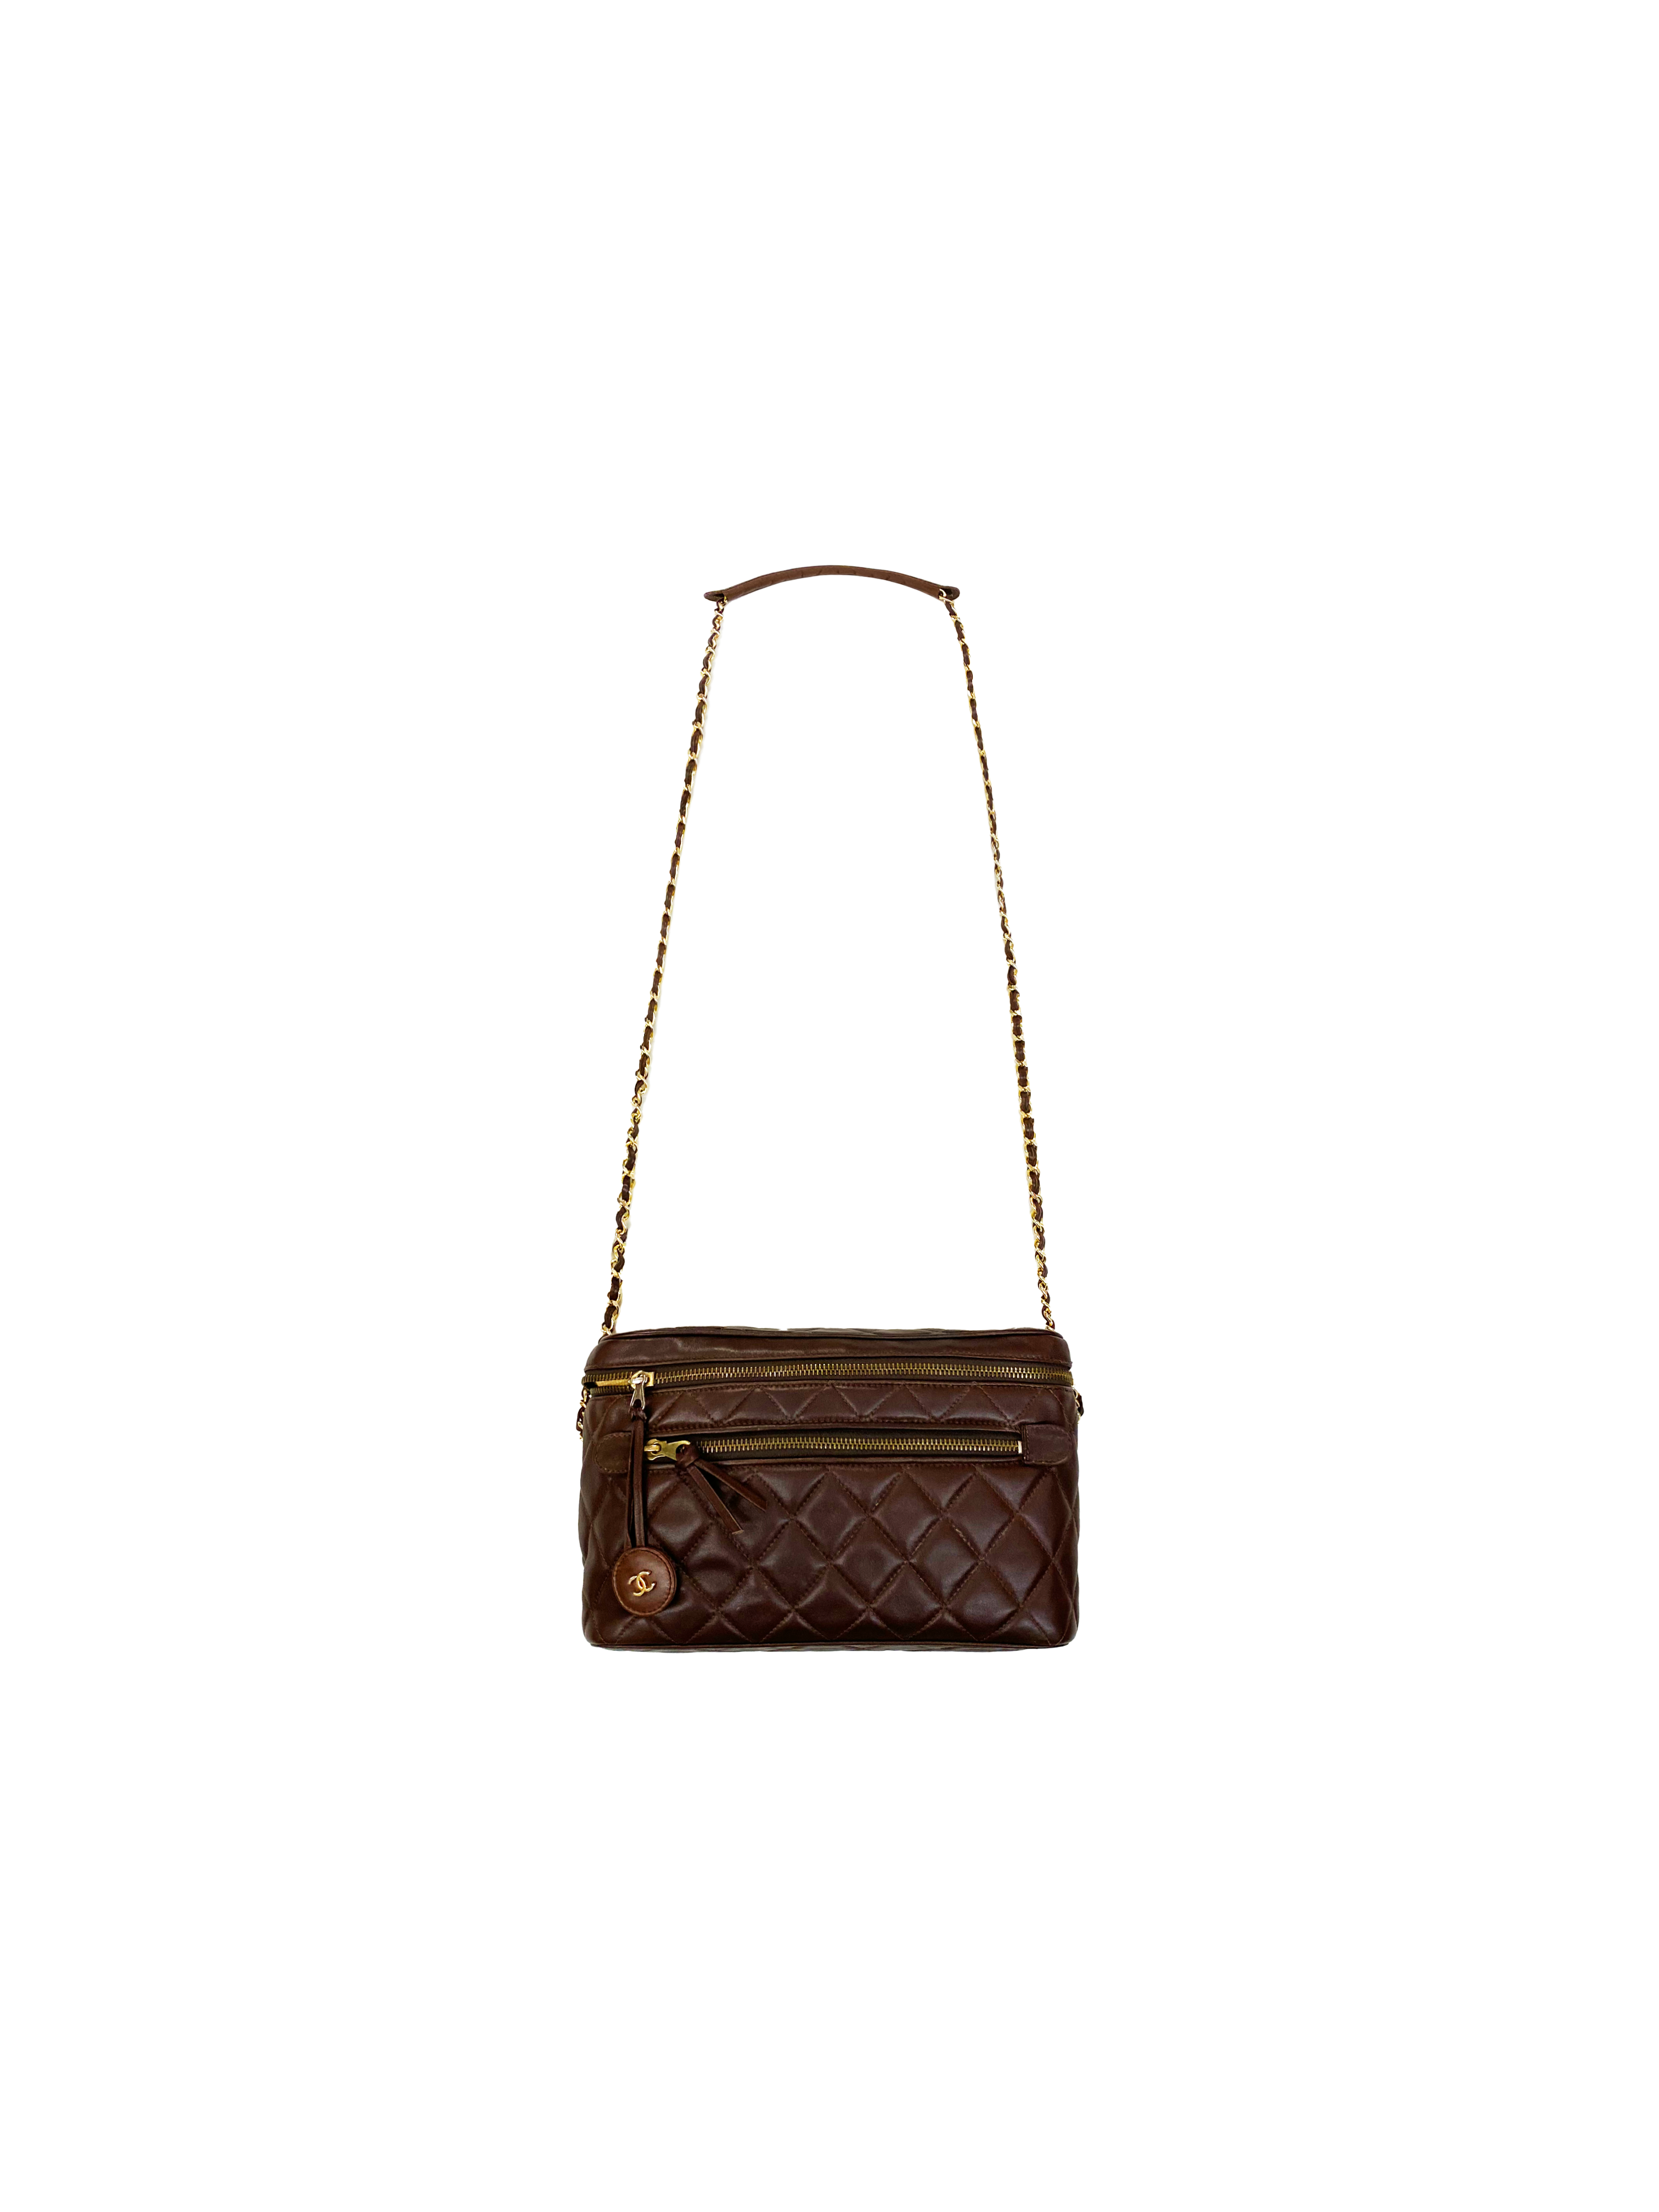 Chanel Early 1980s Chocolate Brown Camera Bag